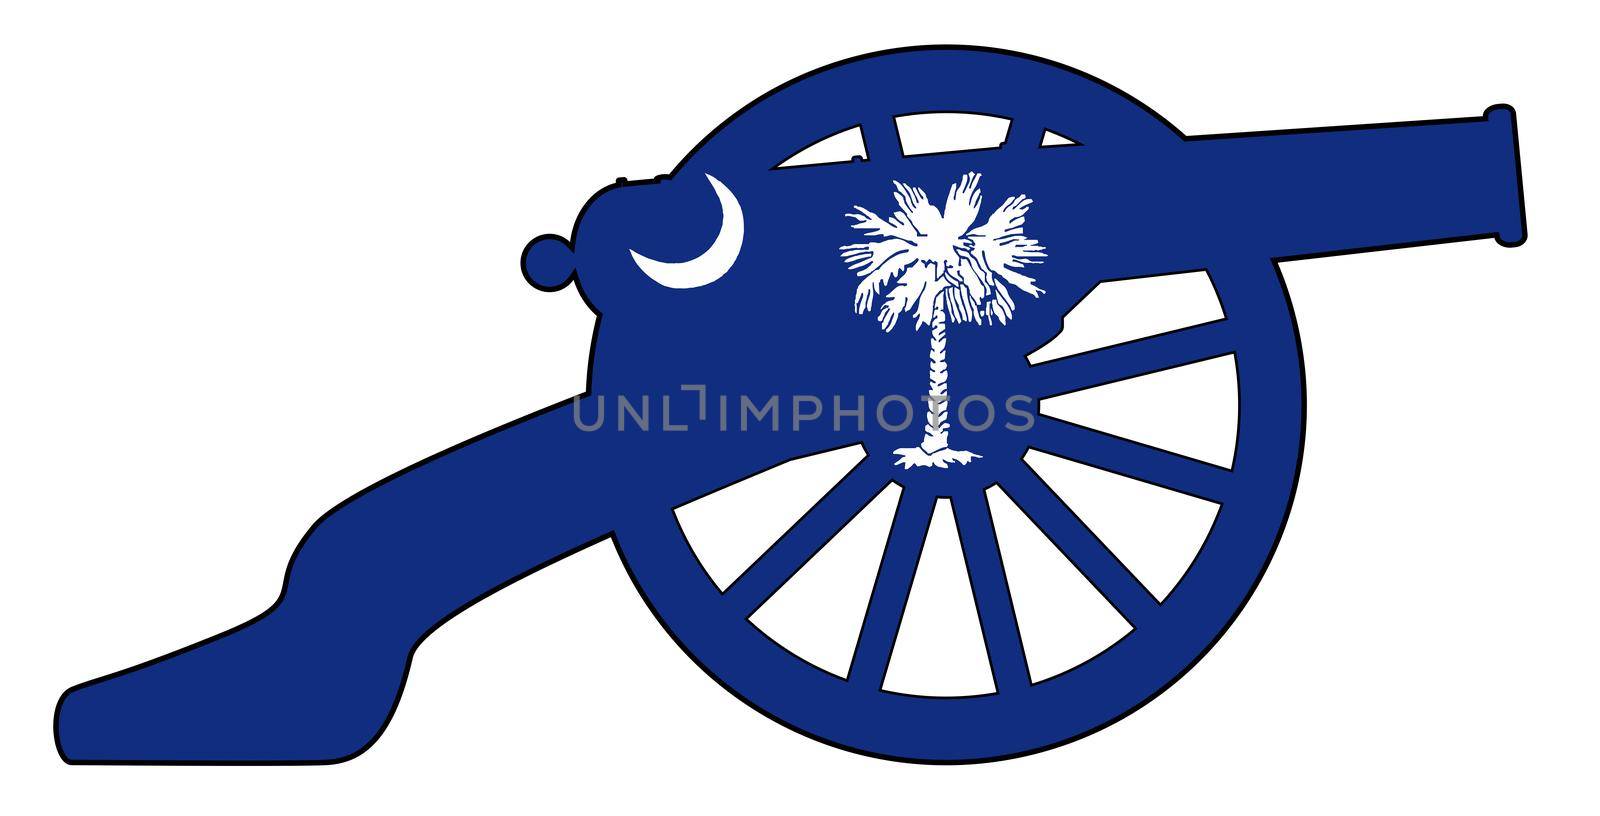 Typical American civil war cannon gun with South Carolina flag isolated on a white background